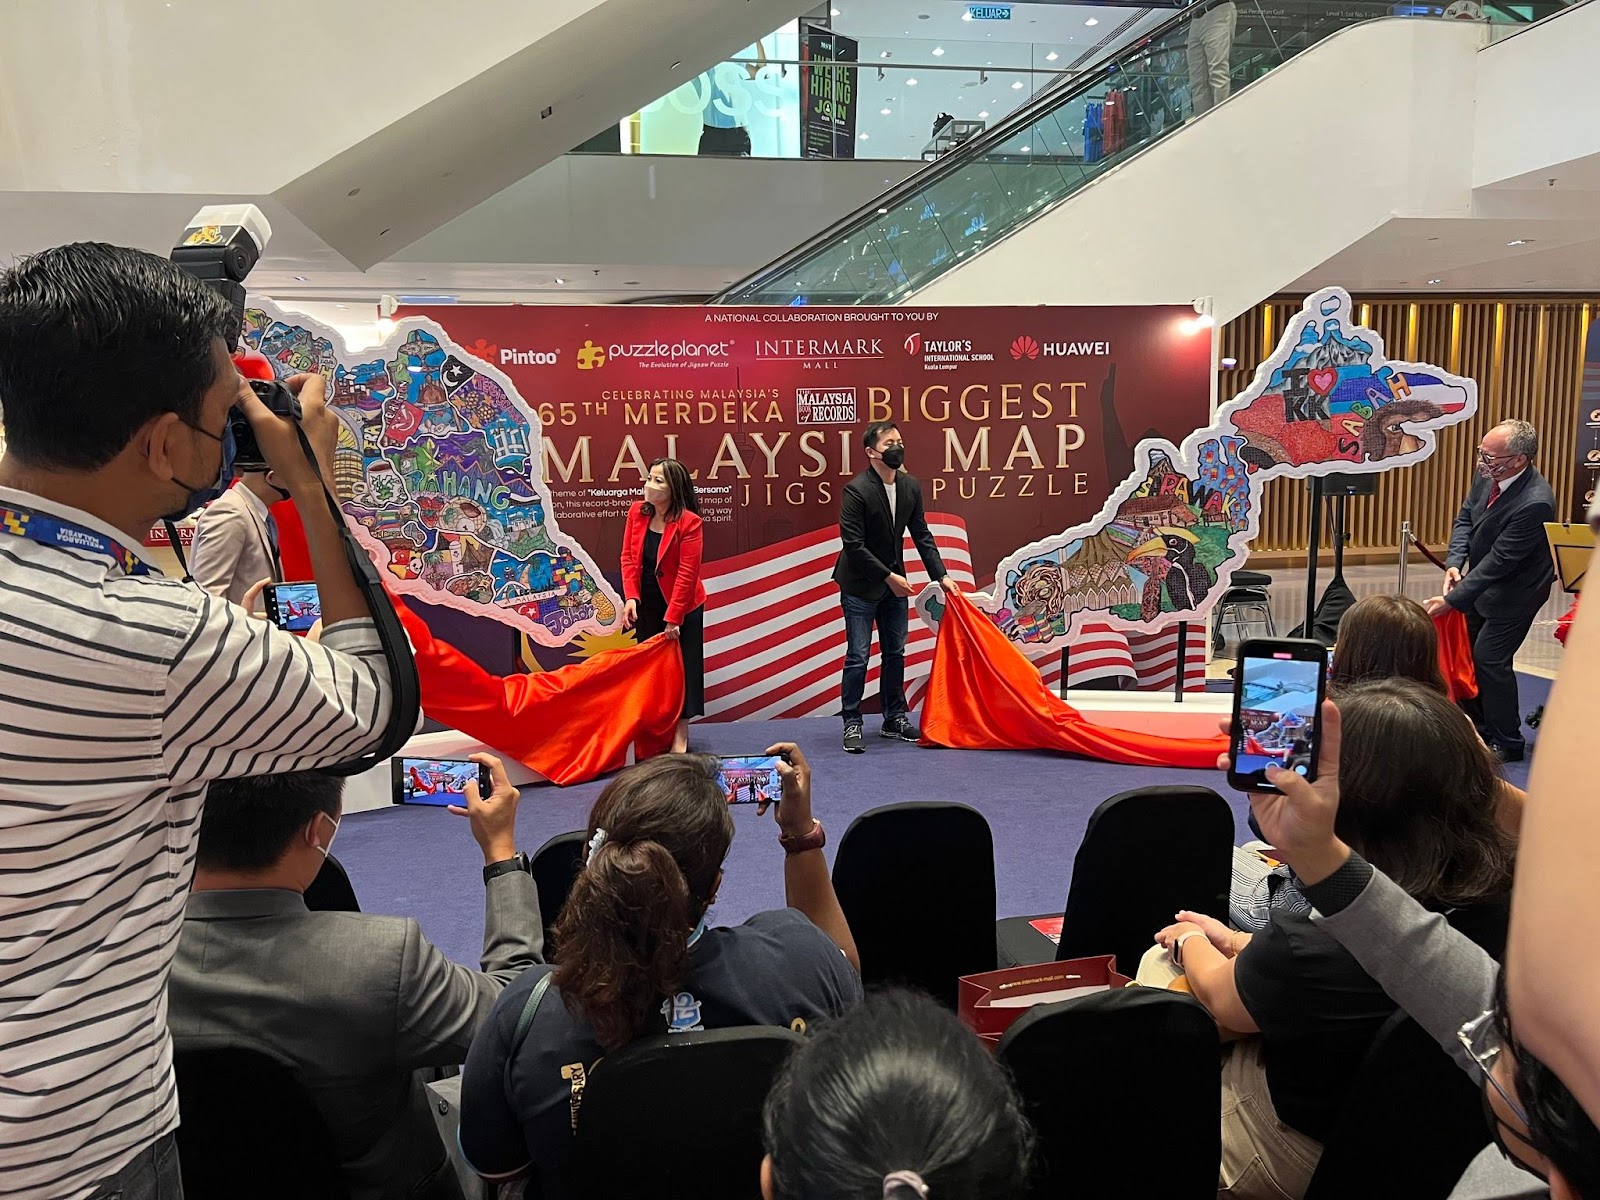 Biggest Malaysia Jigsaw Puzzle Map On Display At Intermark Mall